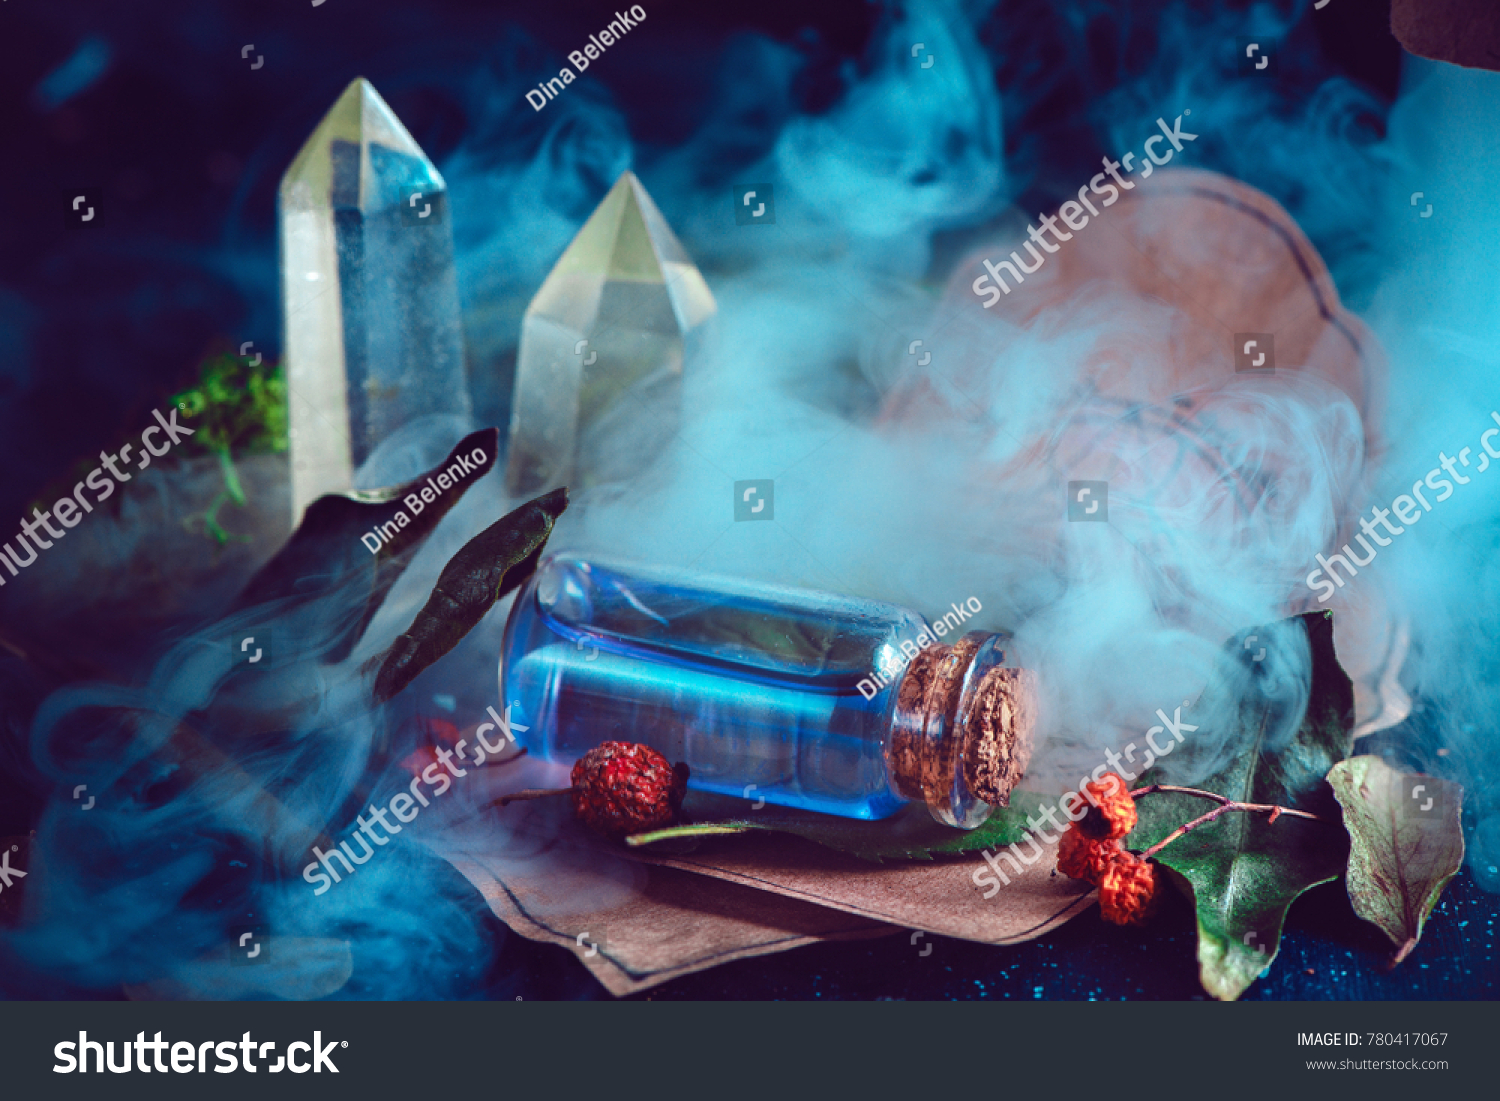 Magical still life with spells, herbs, potion ingredients and a glass bottle with mystic liquid on a dark background. Modern witchcraft concept with copy space. #780417067